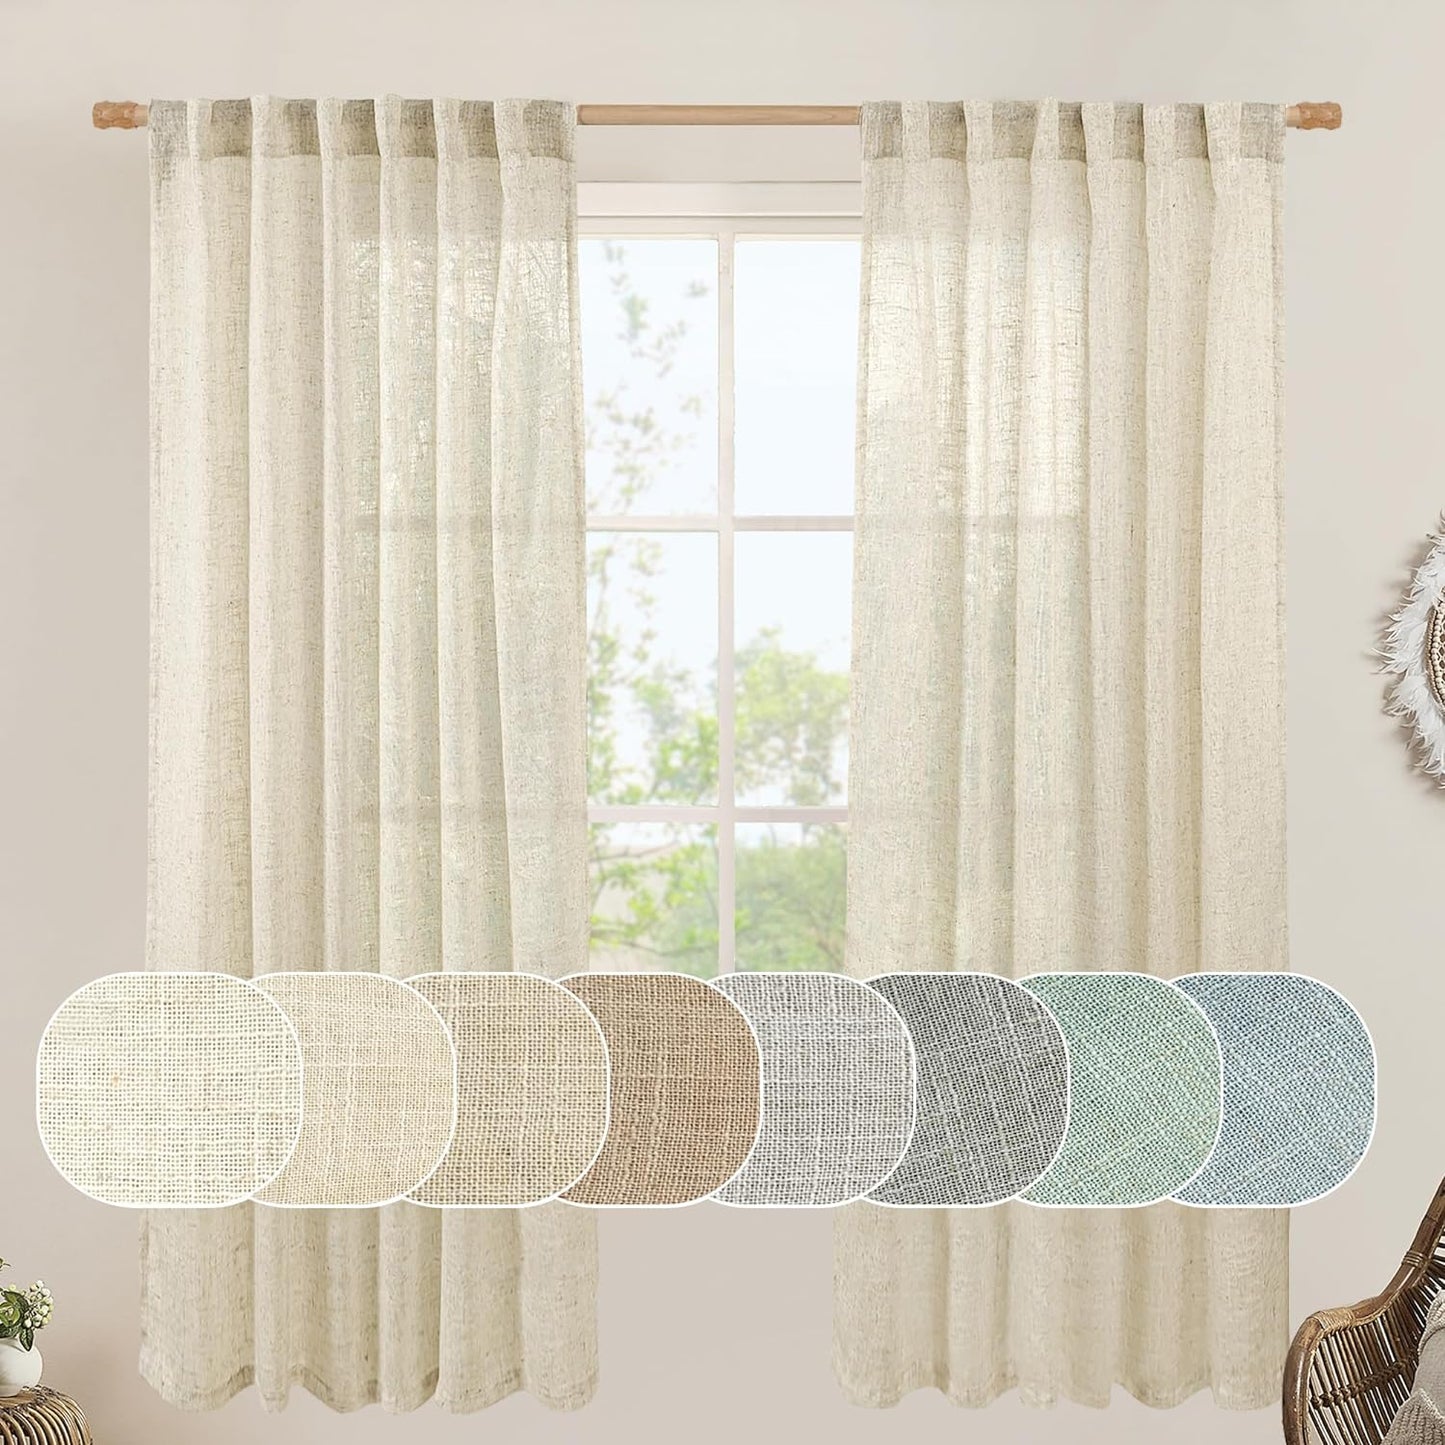 LAMIT Natural Linen Blended Curtains for Living Room, Back Tab and Rod Pocket Semi Sheer Curtains Light Filtering Country Rustic Drapes for Bedroom/Farmhouse, 2 Panels,52 X 108 Inch, Linen  LAMIT Beige 52W X 72L 